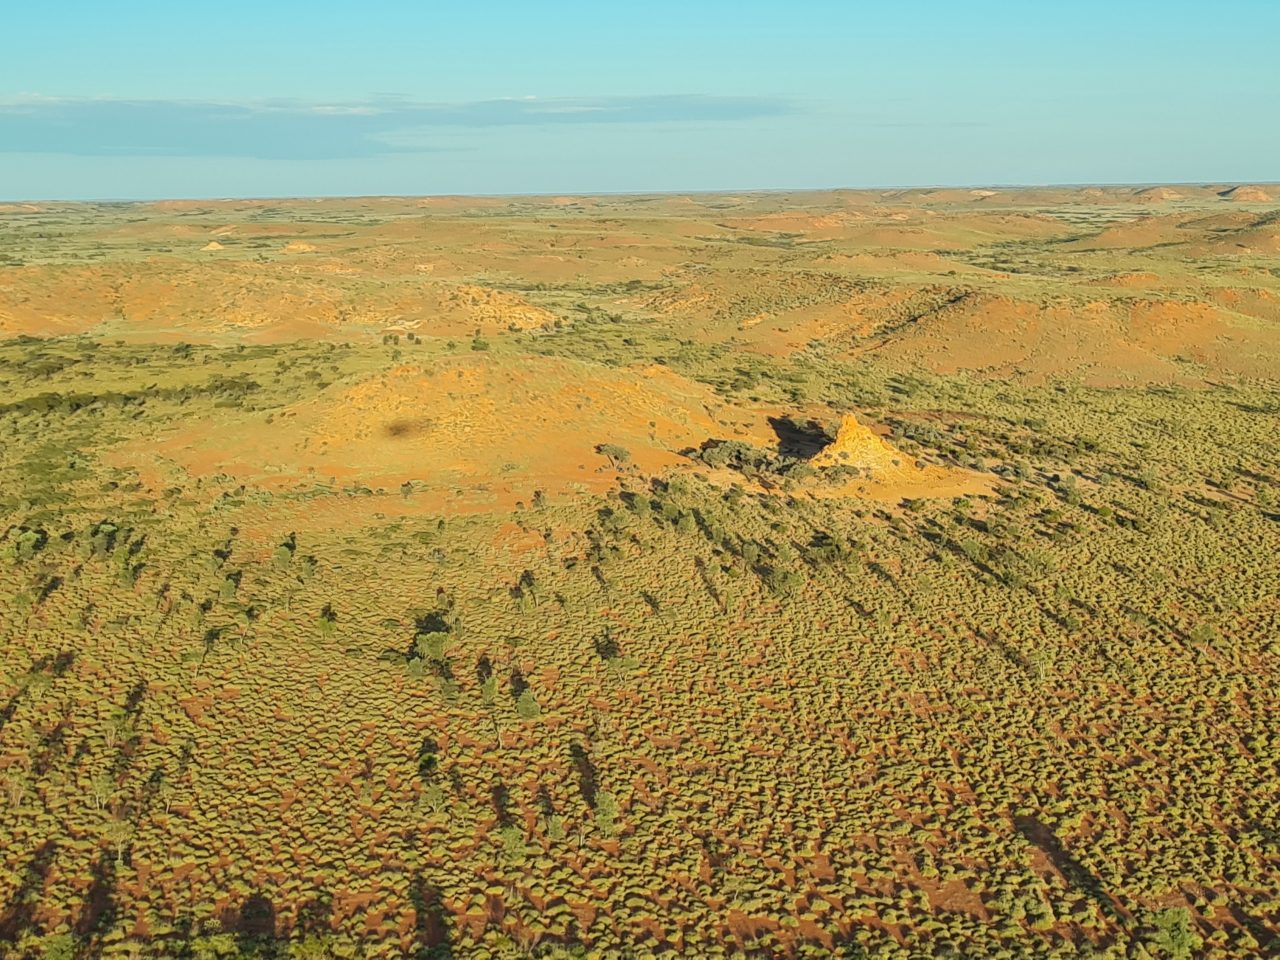 Aerial photo of a floodplain filled with numerous peaks covered in low level vegetation over red soil taken at sunrise giving the landscape a golden glow 